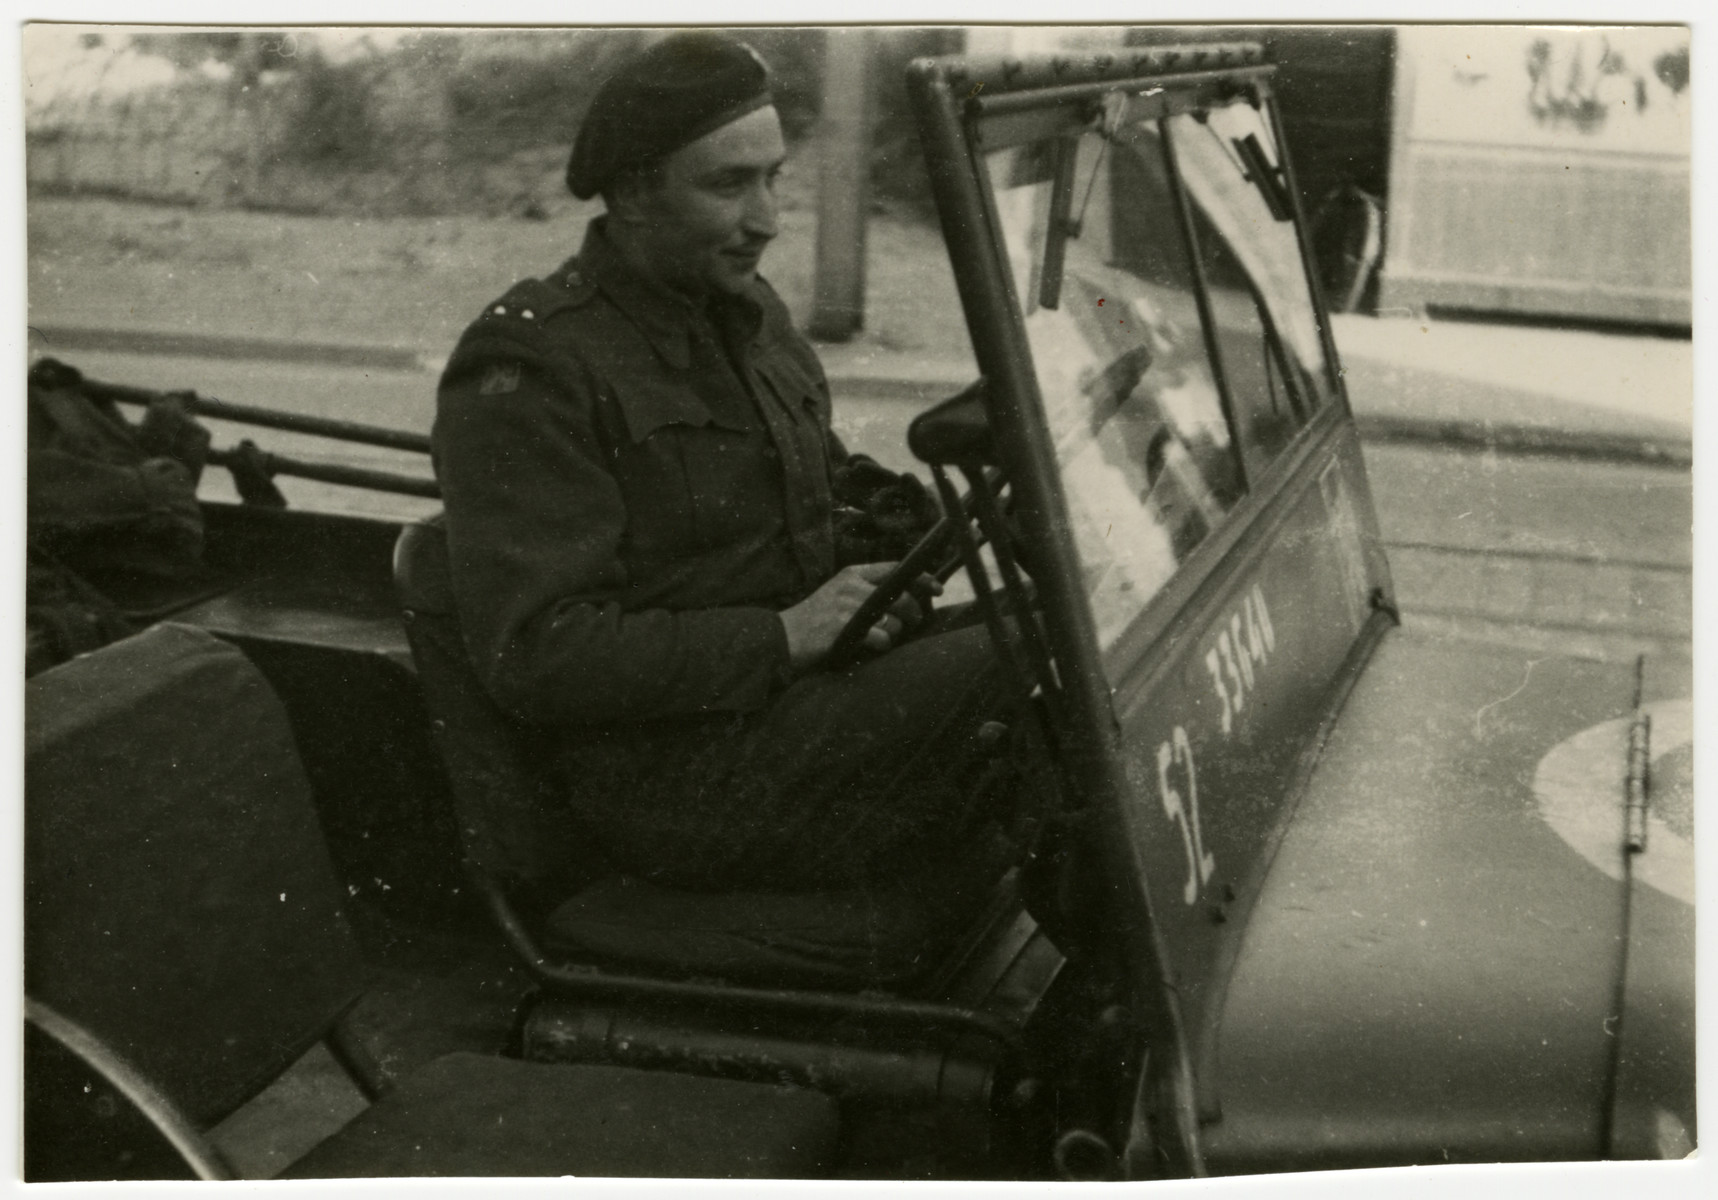 Oscar Lowy, a soldier from the Czech Brigade drives his jeep through Pilsen, Czechoslovakia on its liberation day.